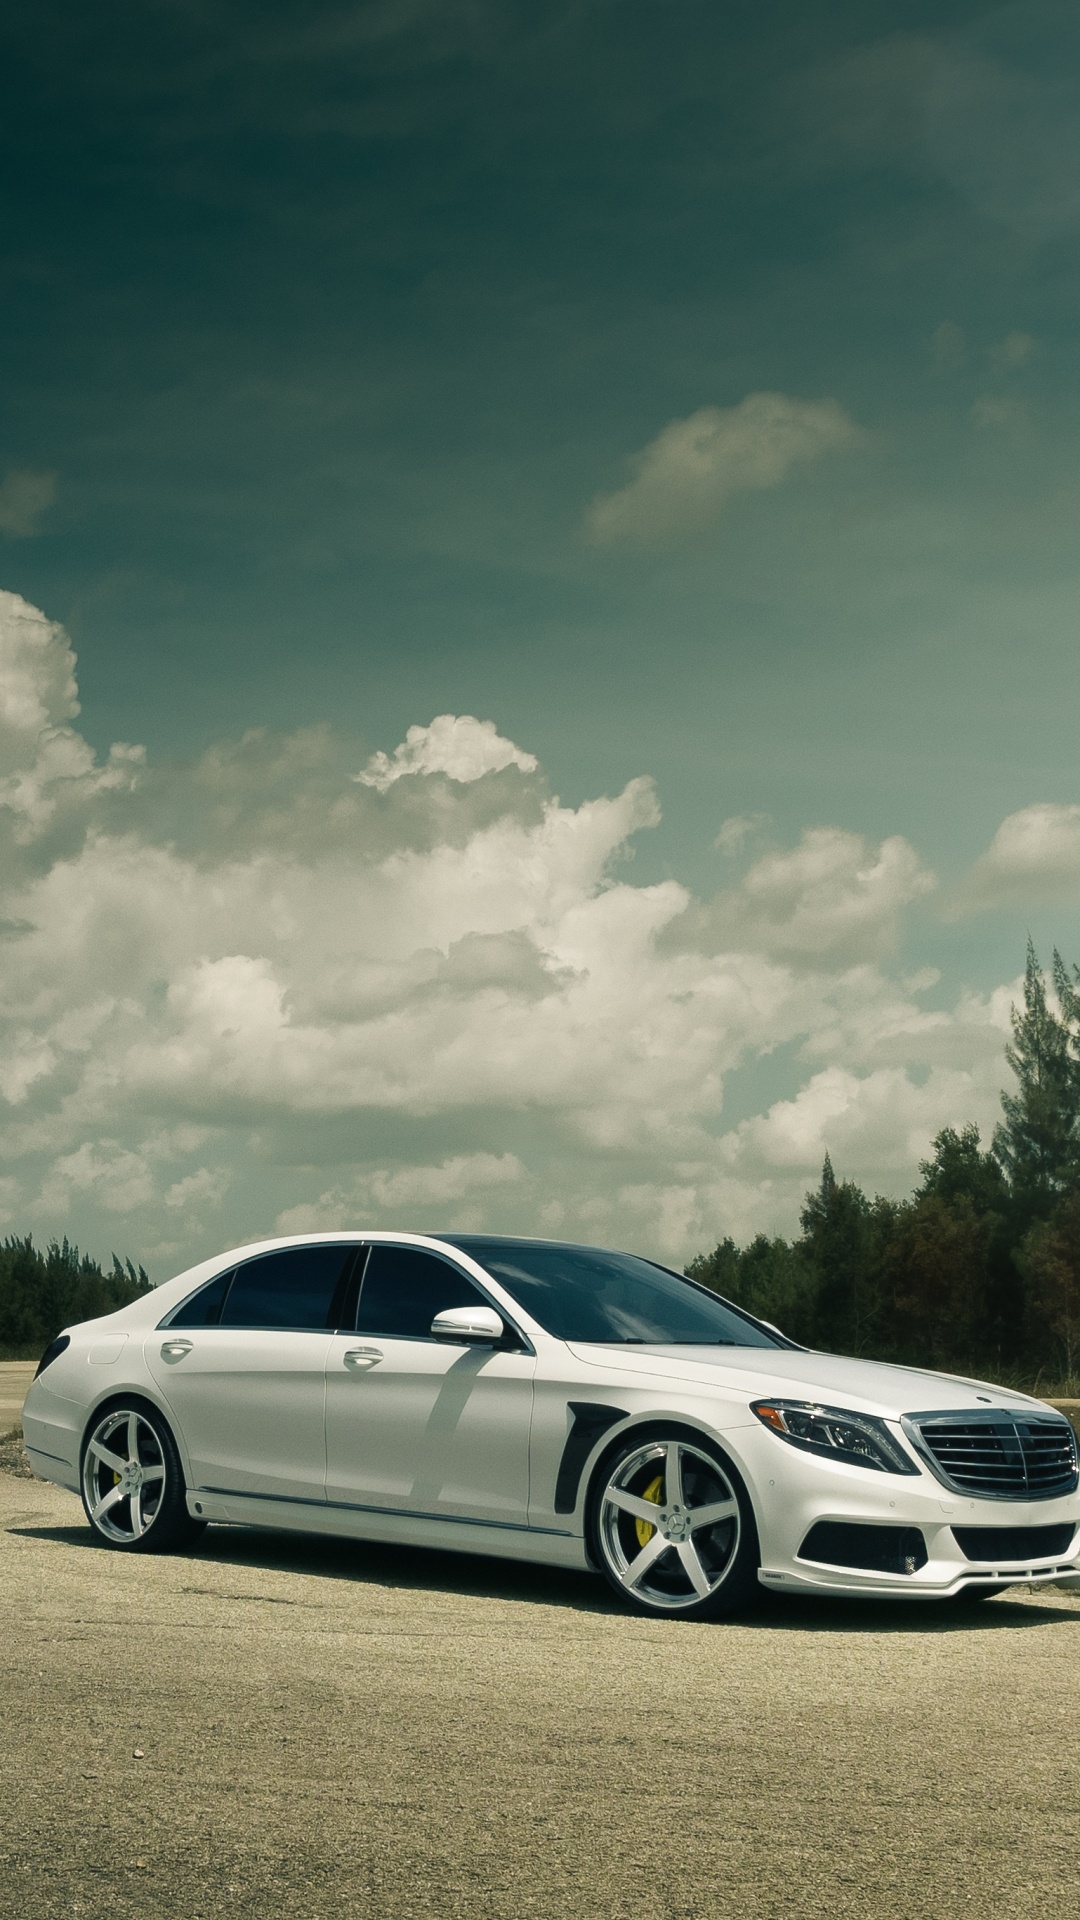 White Sedan on Gray Asphalt Road Under White Clouds and Blue Sky During Daytime. Wallpaper in 1080x1920 Resolution